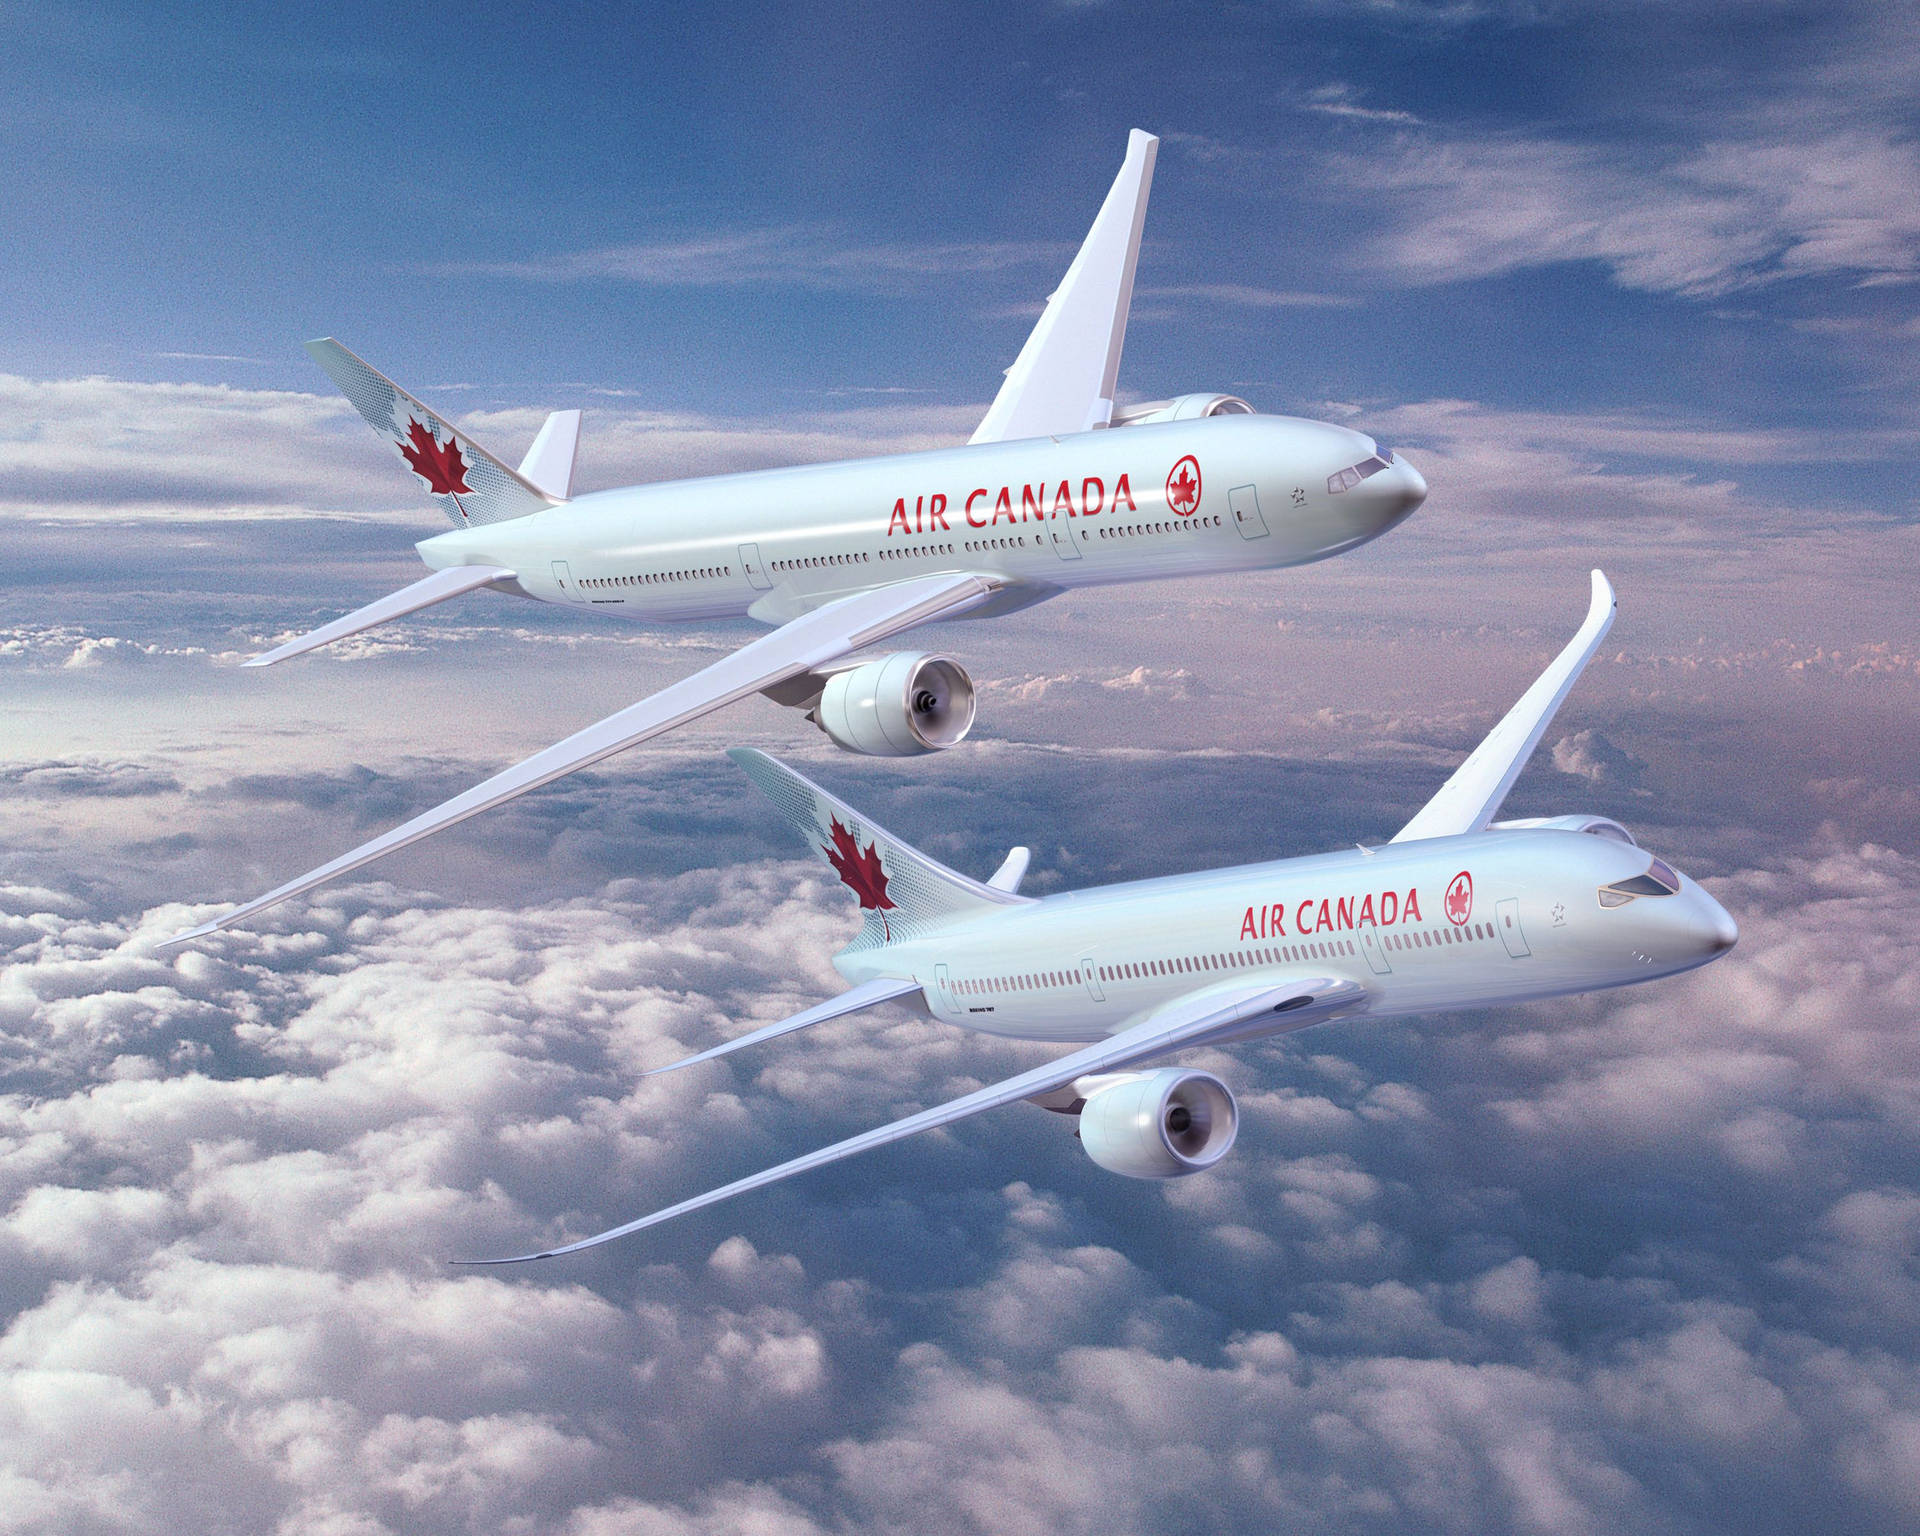 Two White Air Canada Planes Above The Clouds Wallpaper